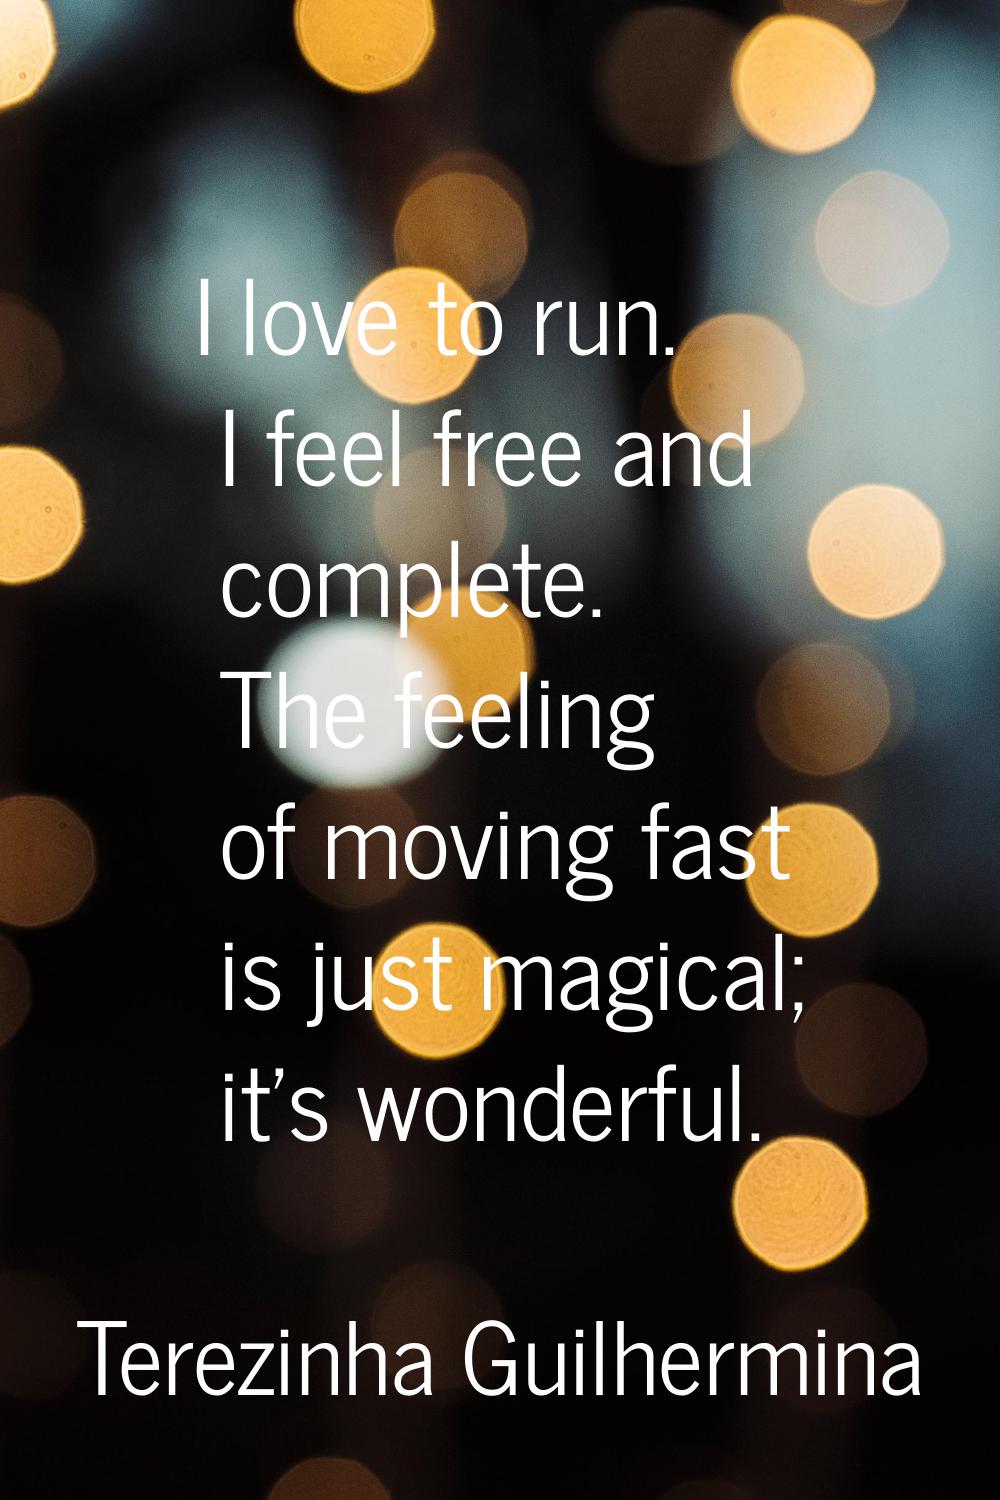 I love to run. I feel free and complete. The feeling of moving fast is just magical; it's wonderful